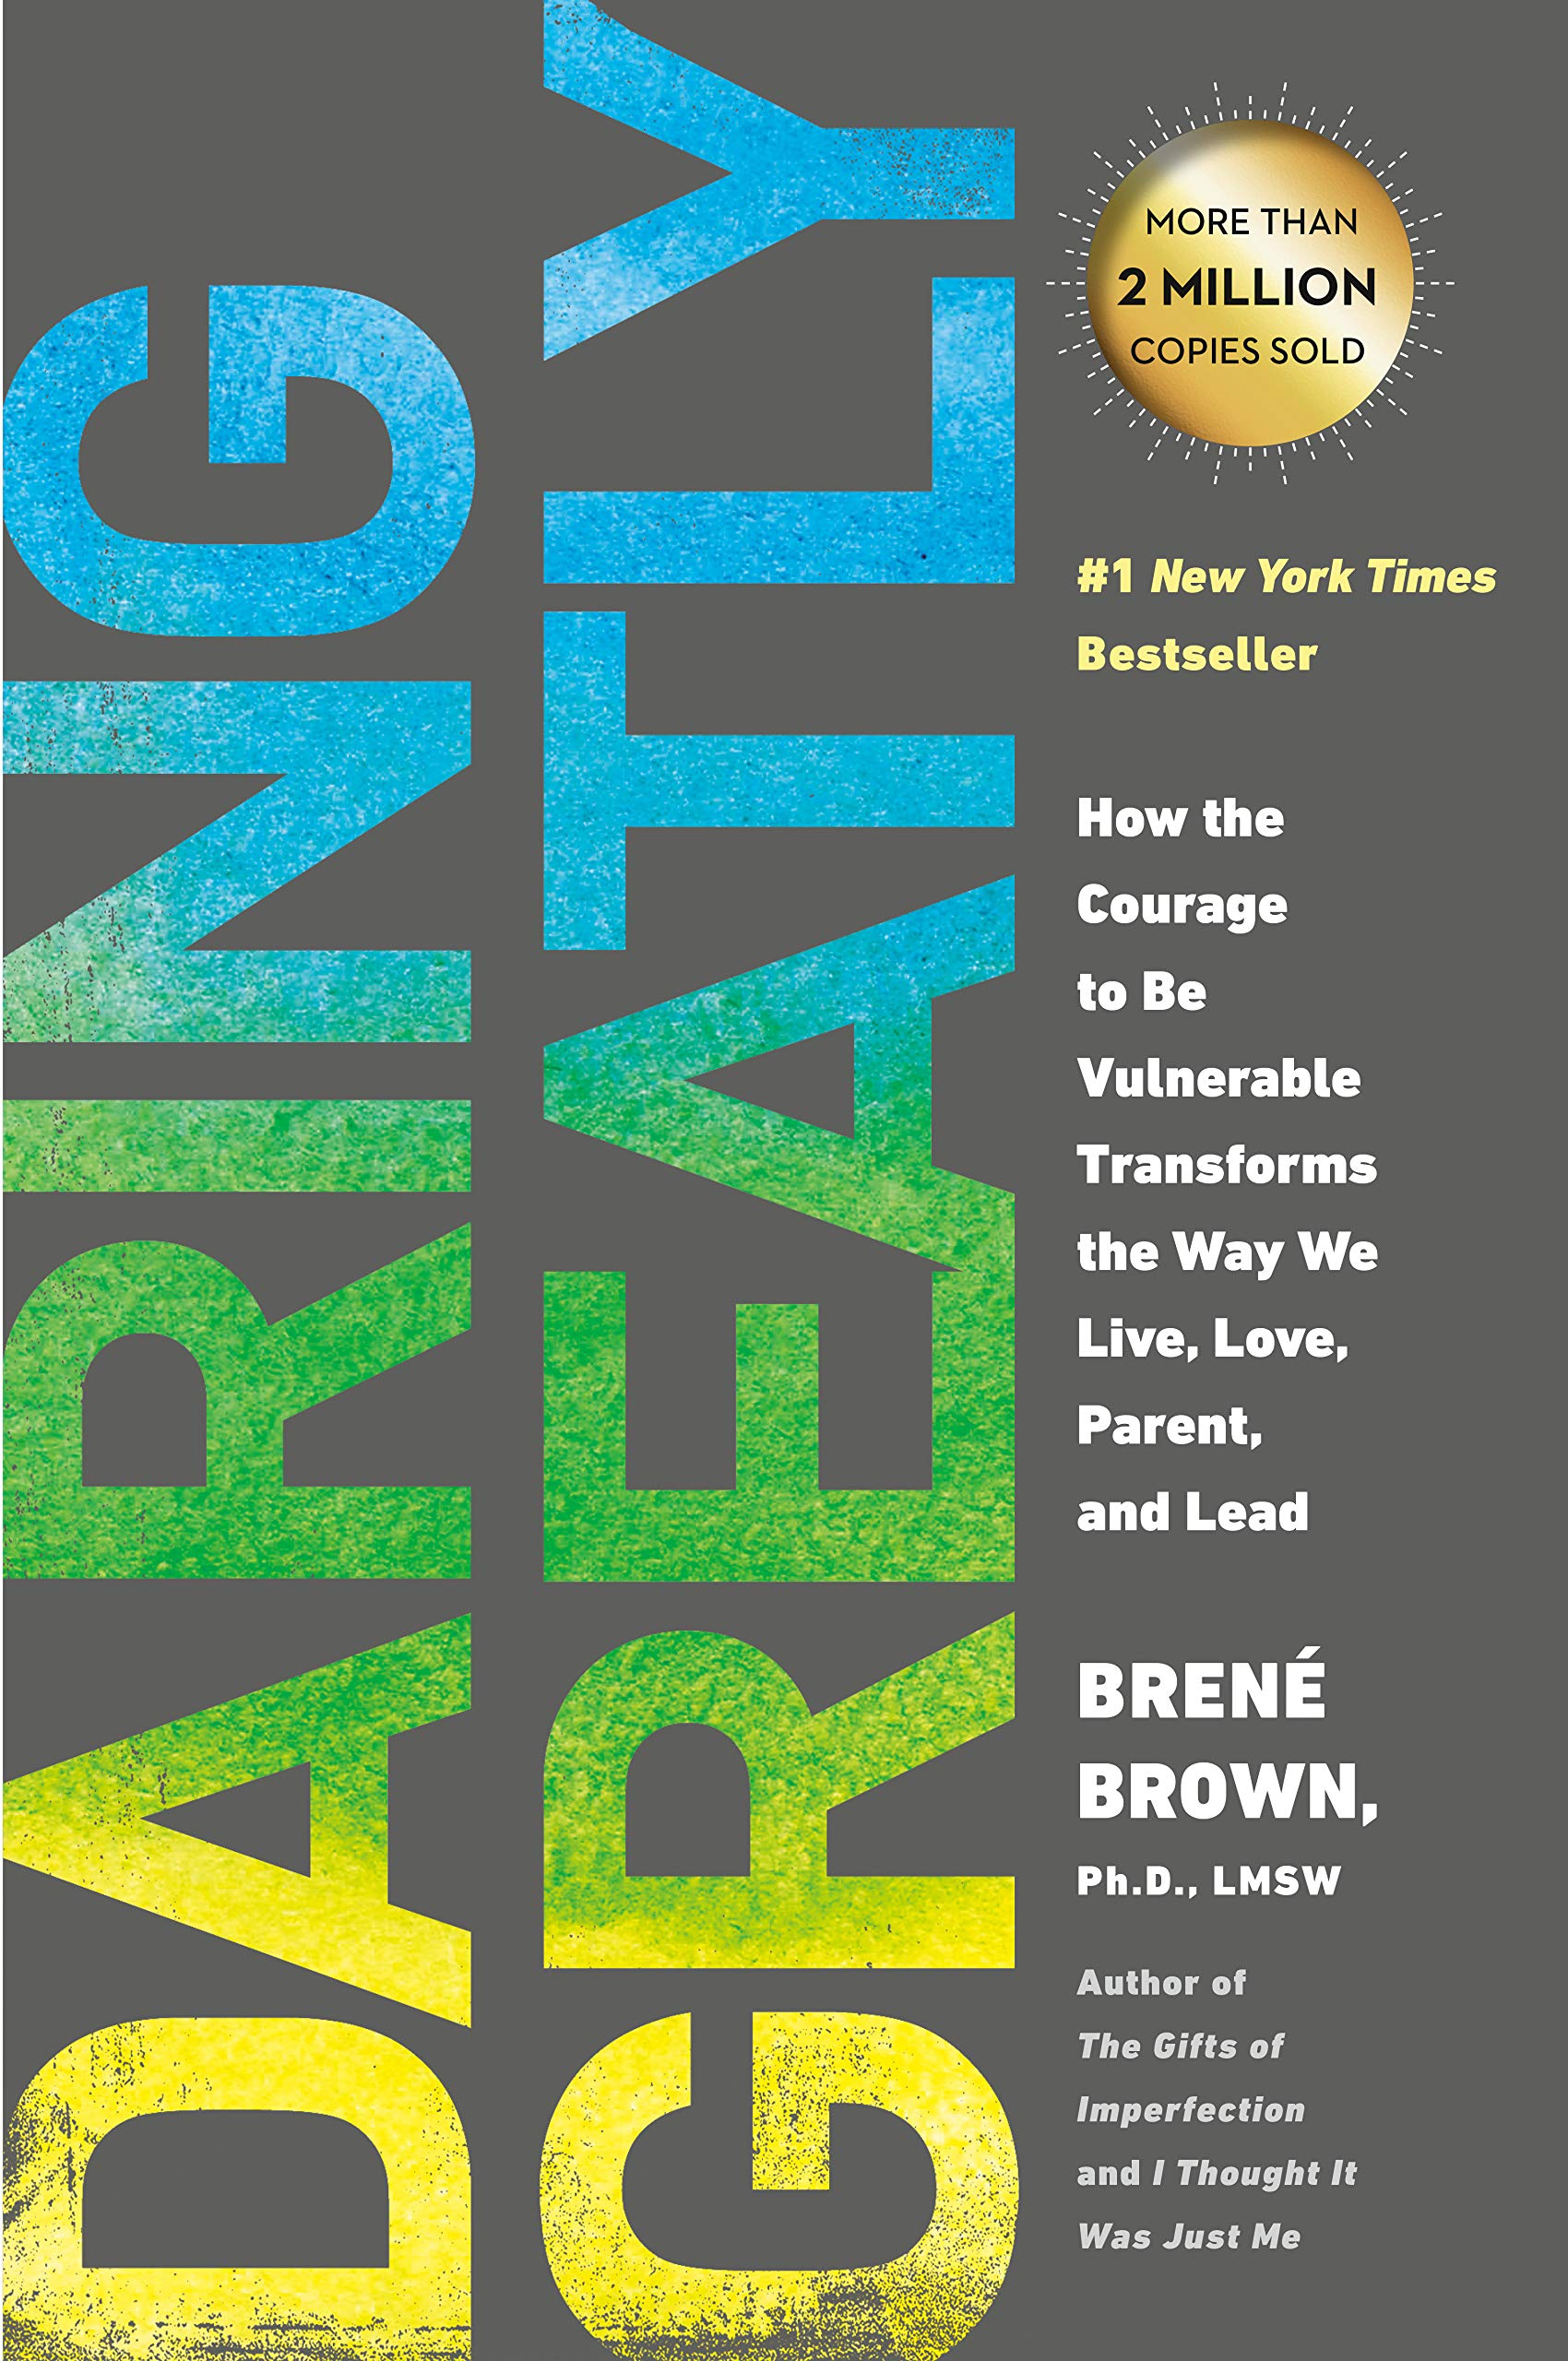 8. 'Daring Greatly: How the Courage to Be Vulnerable Transforms the Way We Live, Love, Parent, and Lead' by Brené Brown